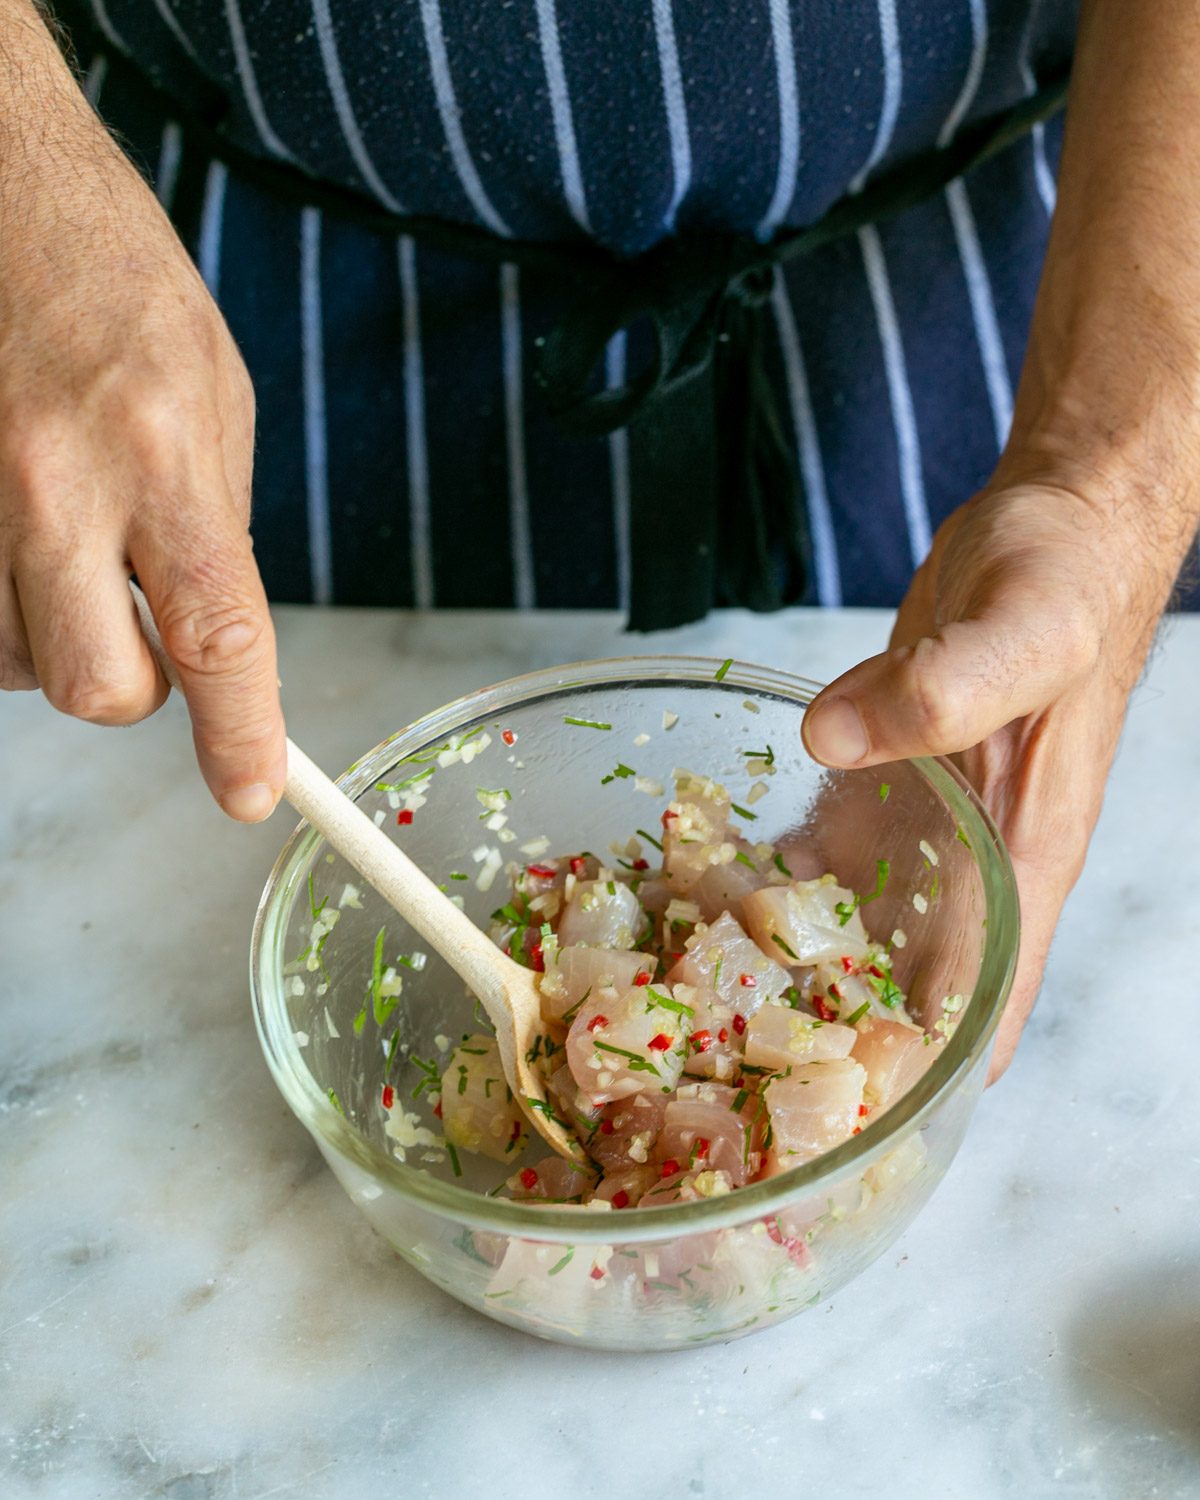 Mixing all crudo ingredients in a bowl